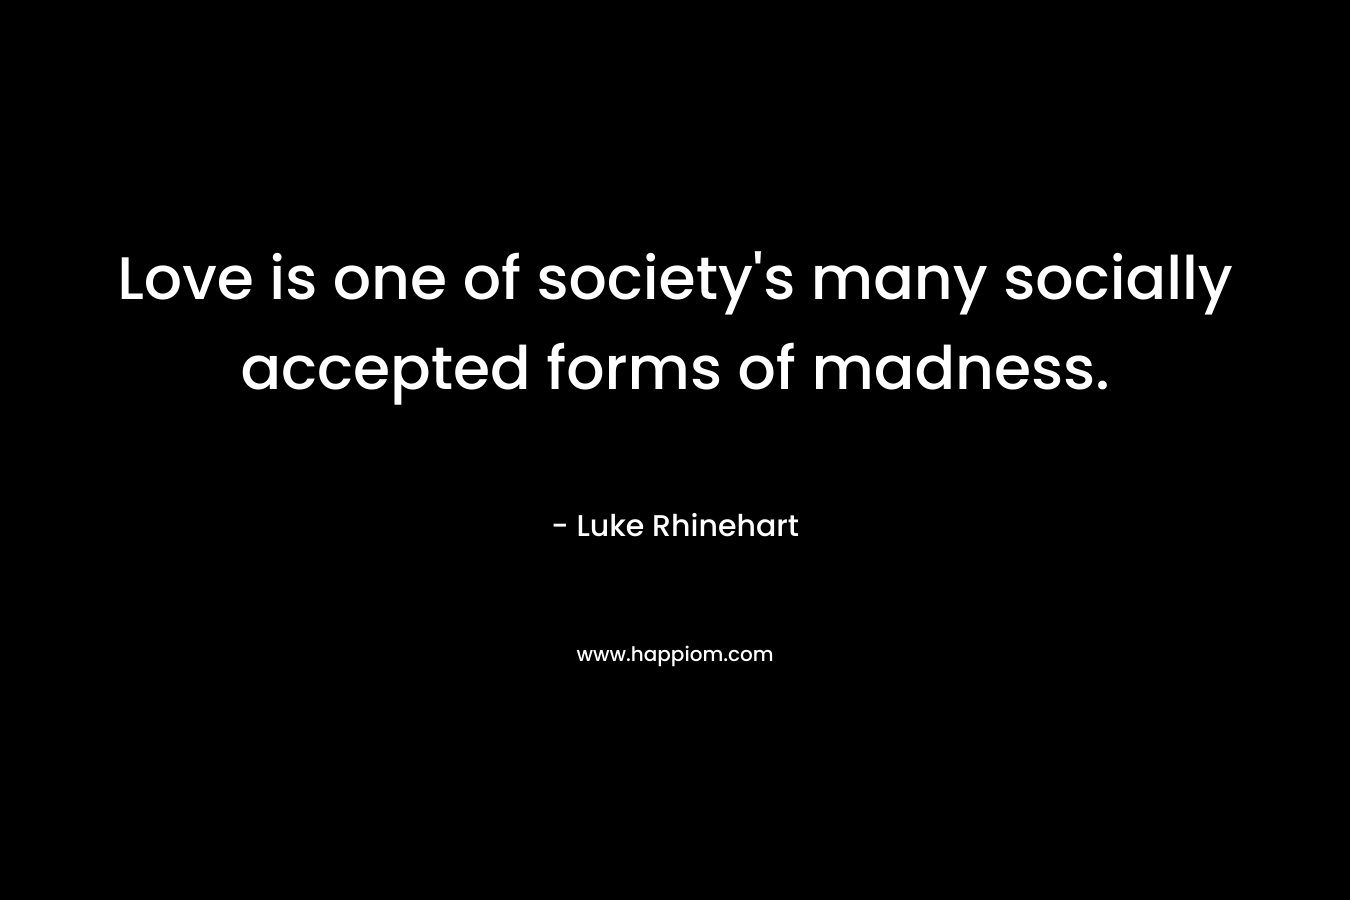 Love is one of society's many socially accepted forms of madness.